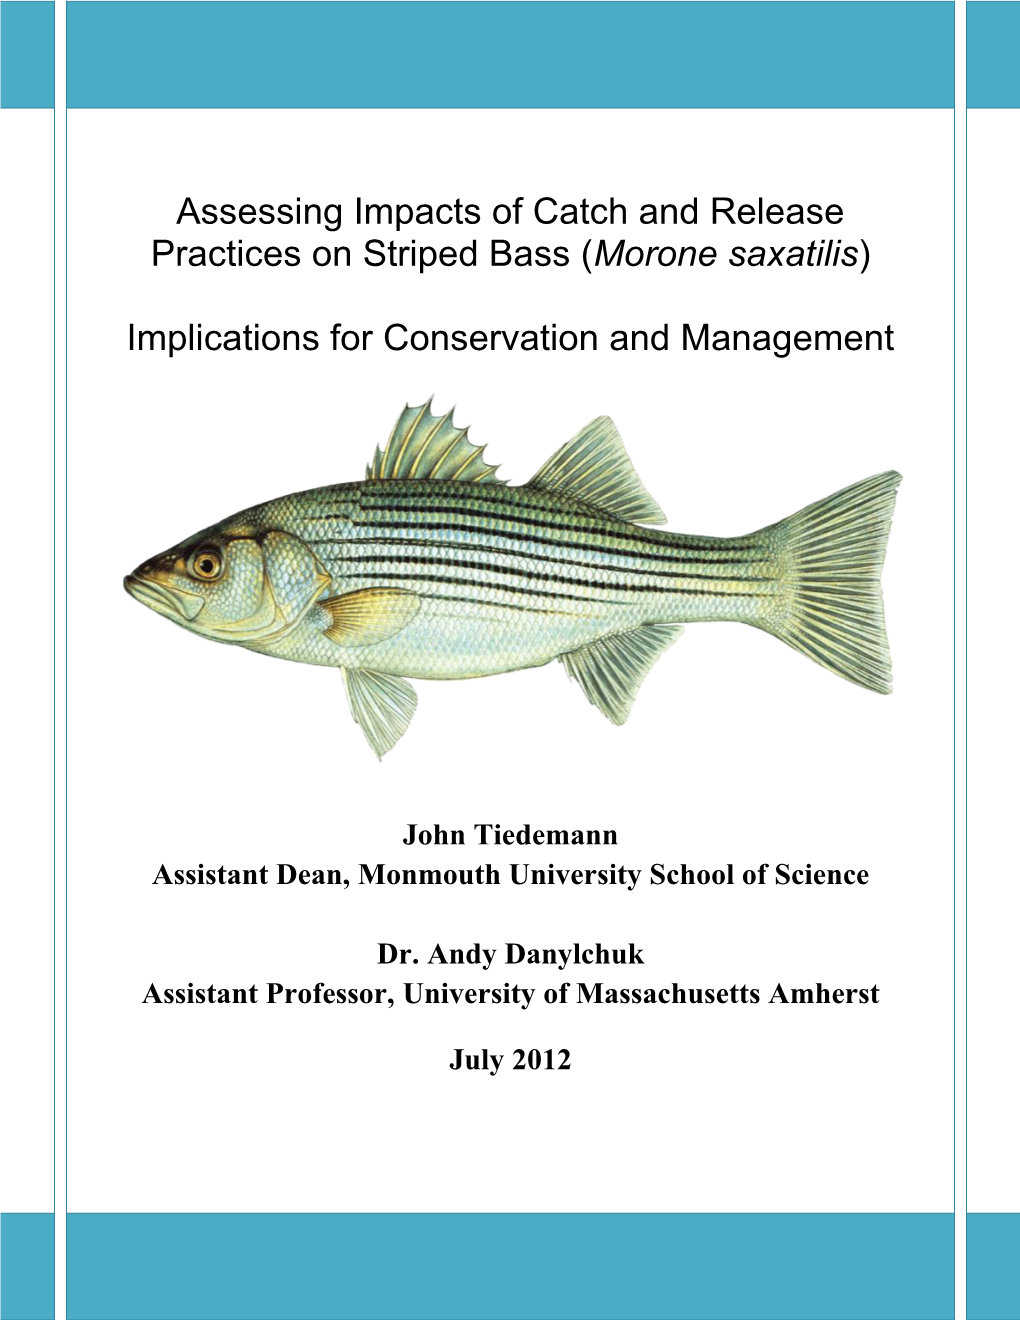 Assessing Impacts of Catch and Release Practices on Striped Bass (Morone Saxatilis)